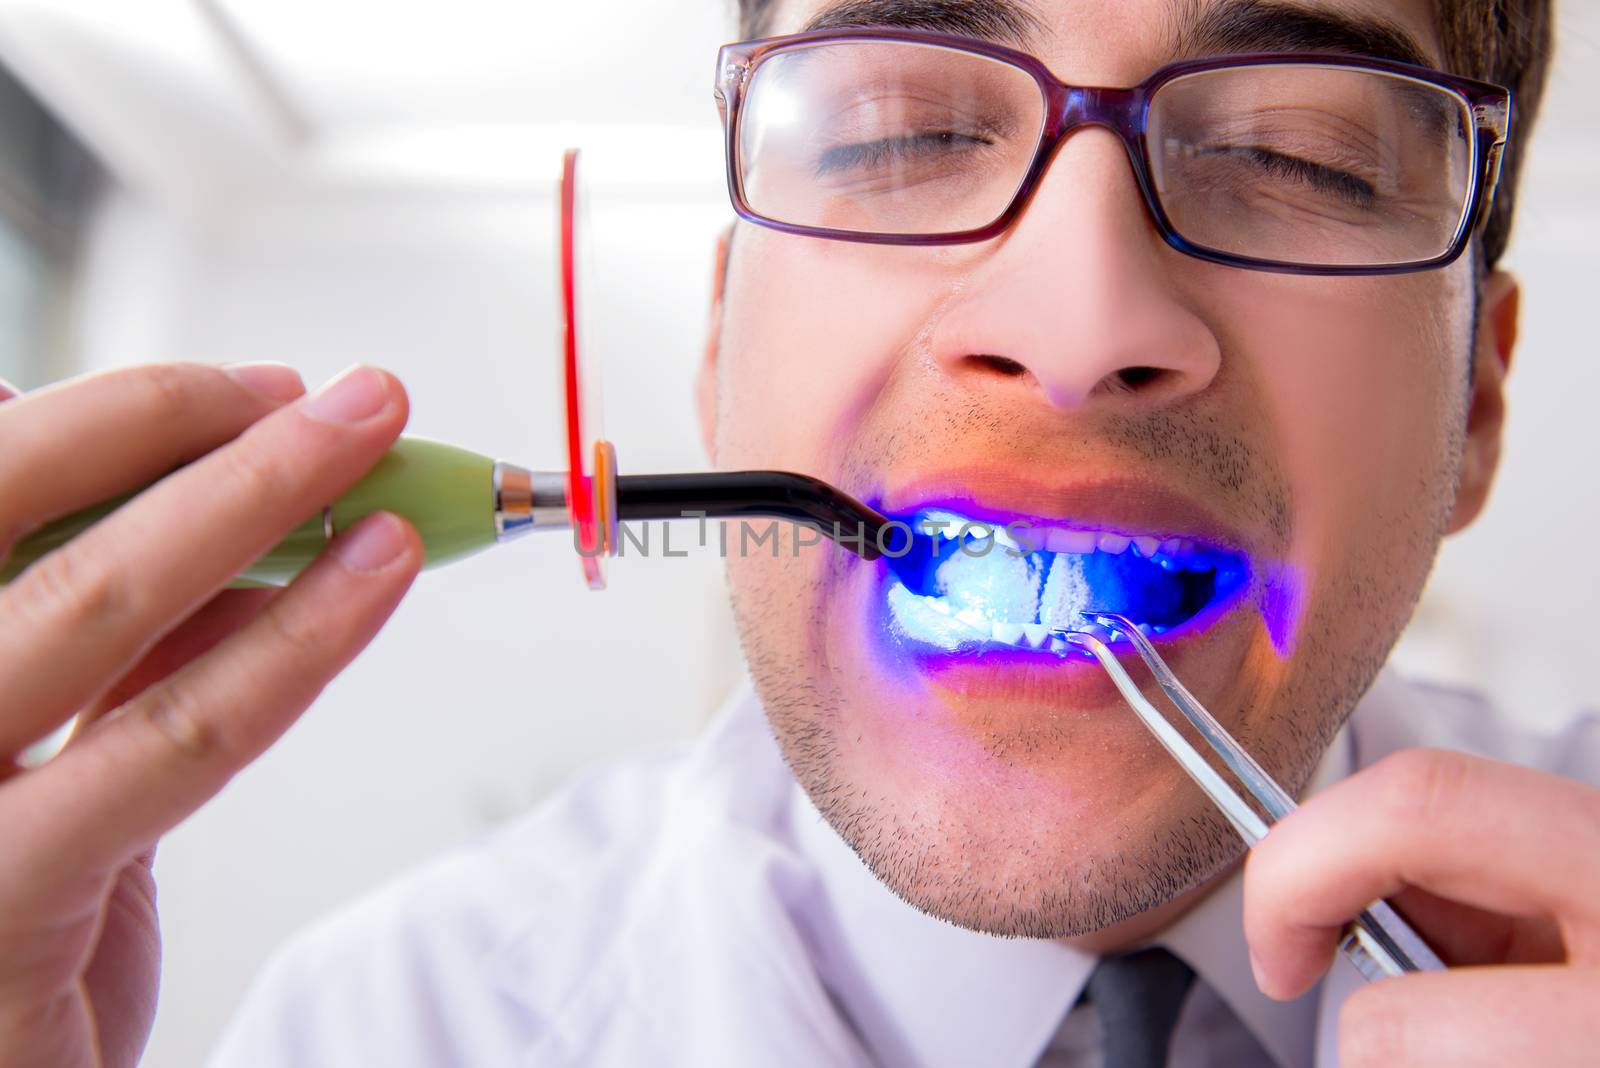 Funny dentist with curing light in medical concept by Elnur